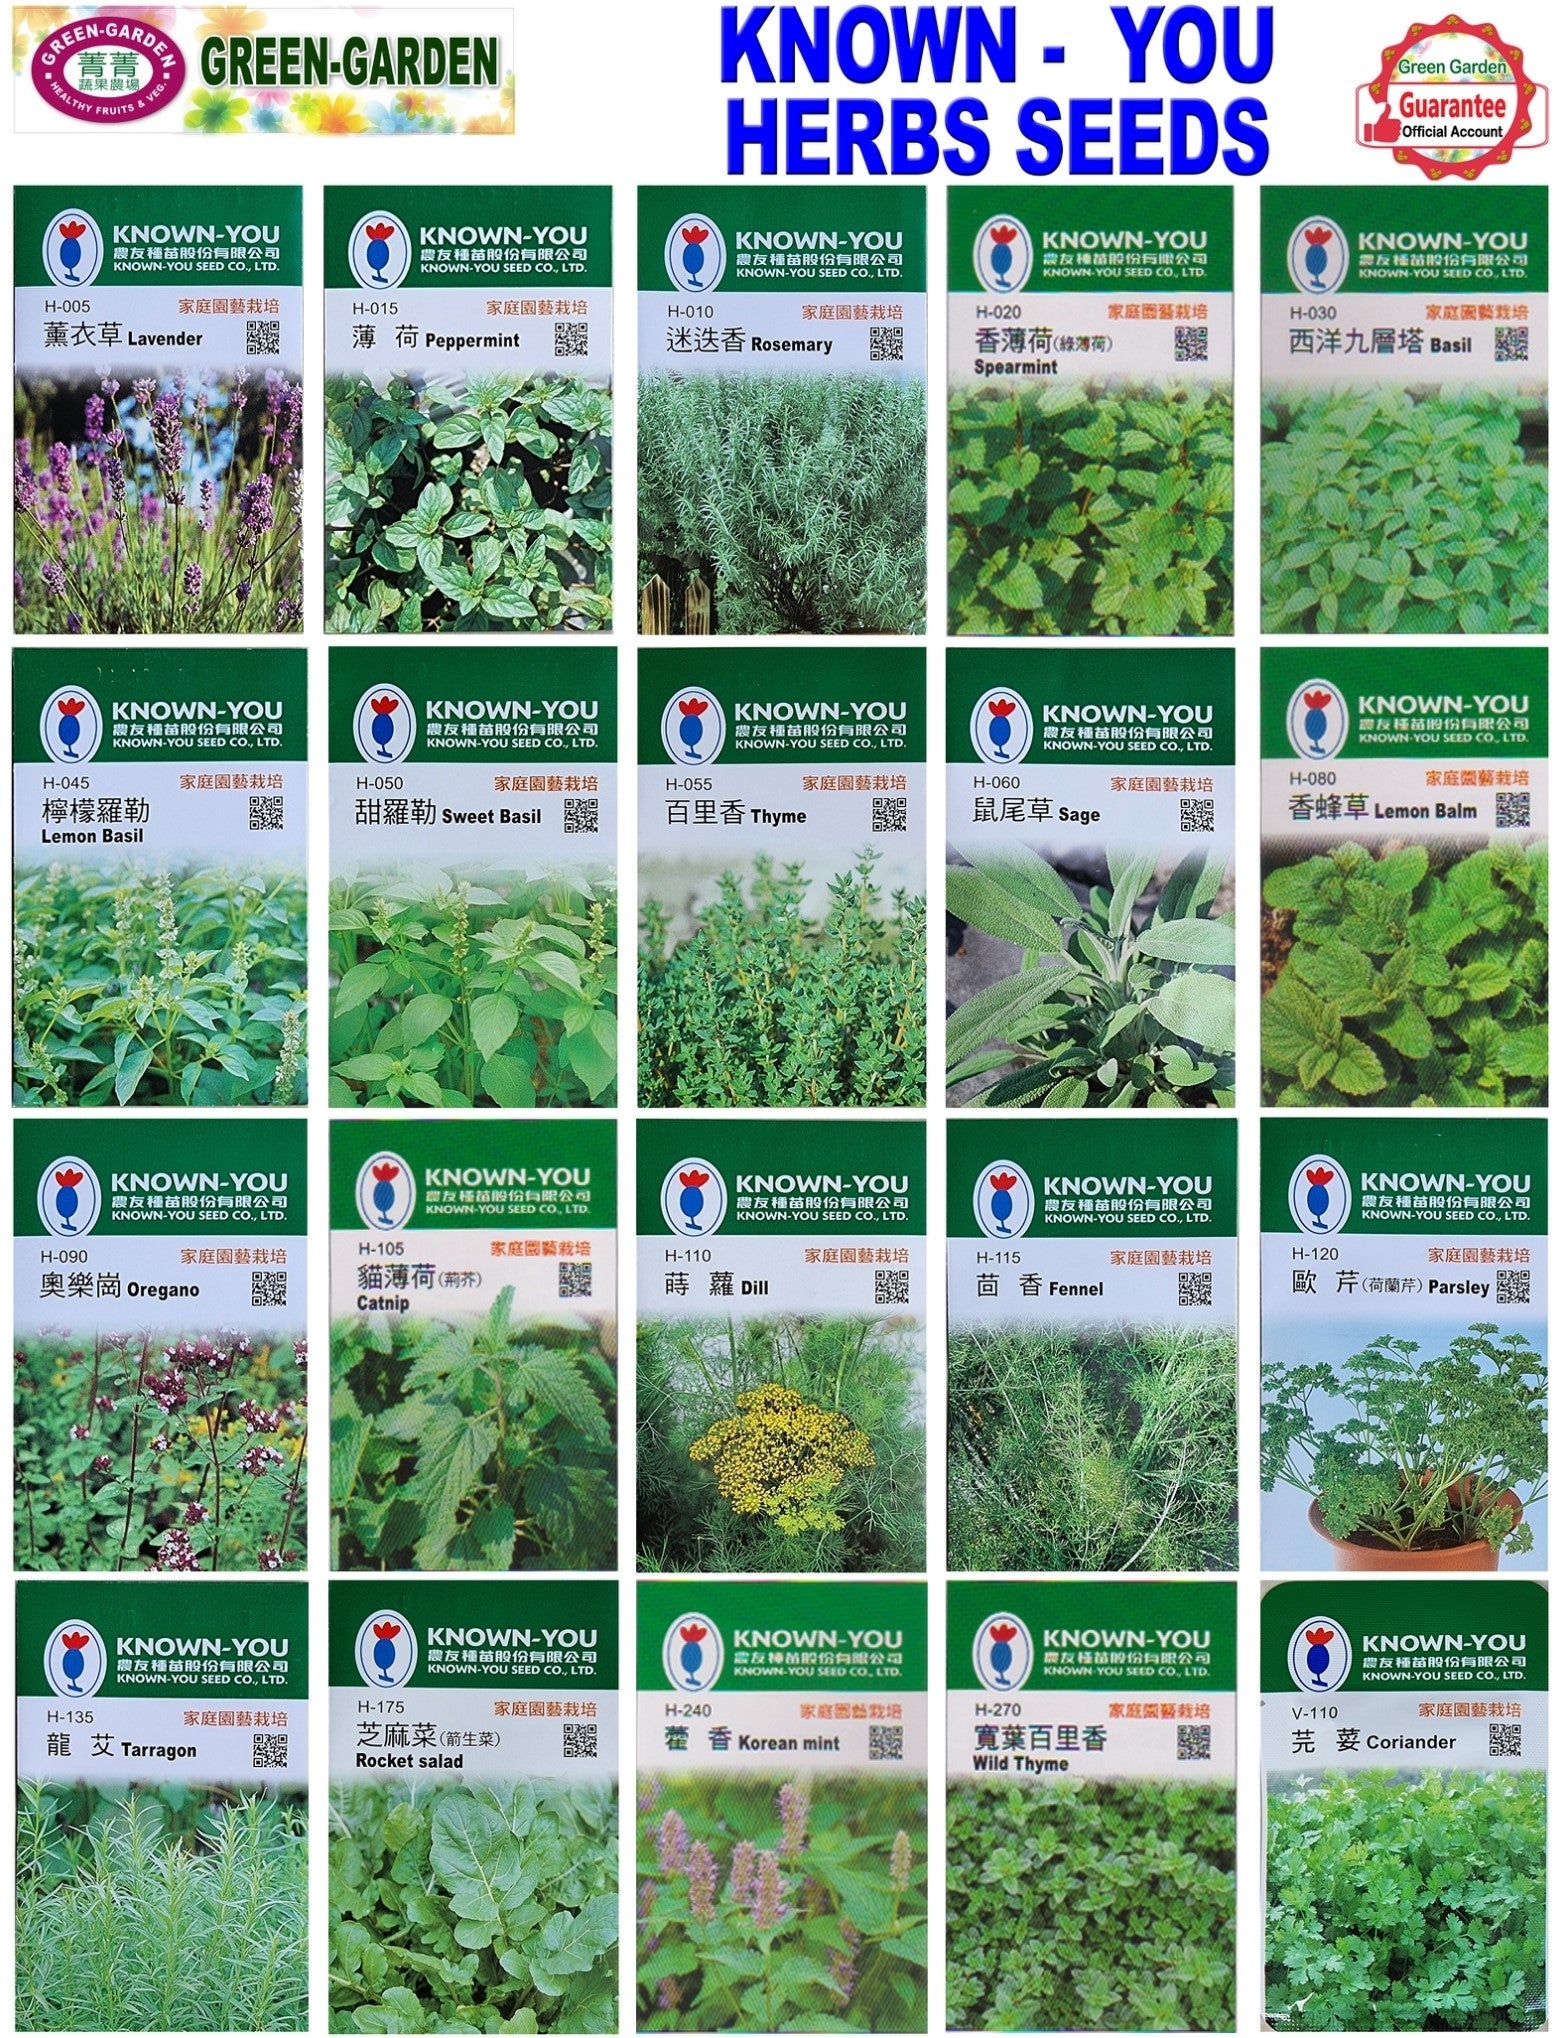 Known You Herbs Seeds (H-055 Thyme)